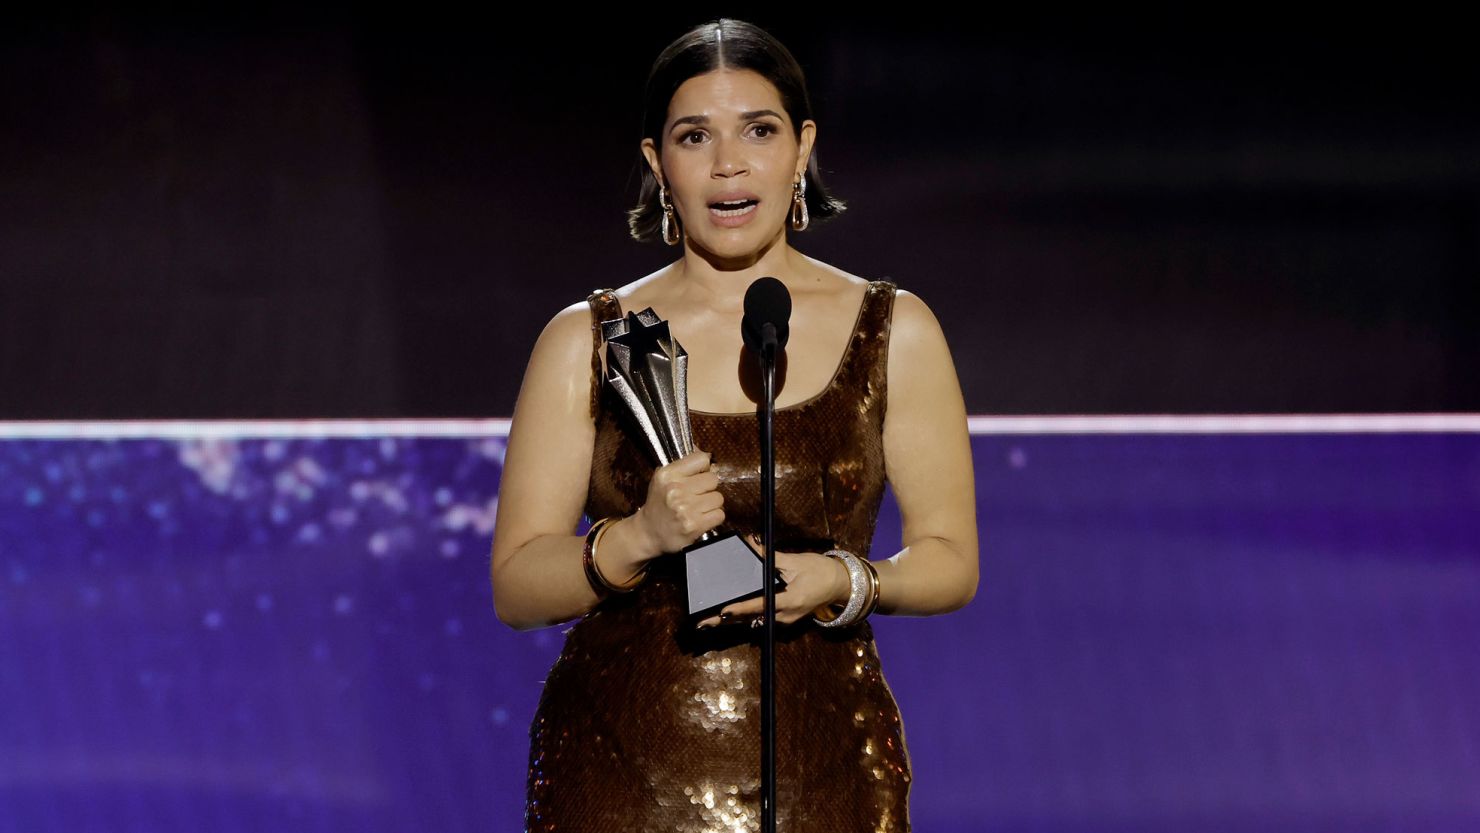 SANTA MONICA, CALIFORNIA - JANUARY 14: America Ferrera accepts the SeeHer Award onstage during the 29th Annual Critics Choice Awards at Barker Hangar on January 14, 2024 in Santa Monica, California. (Photo by Kevin Winter/Getty Images for Critics Choice Association)